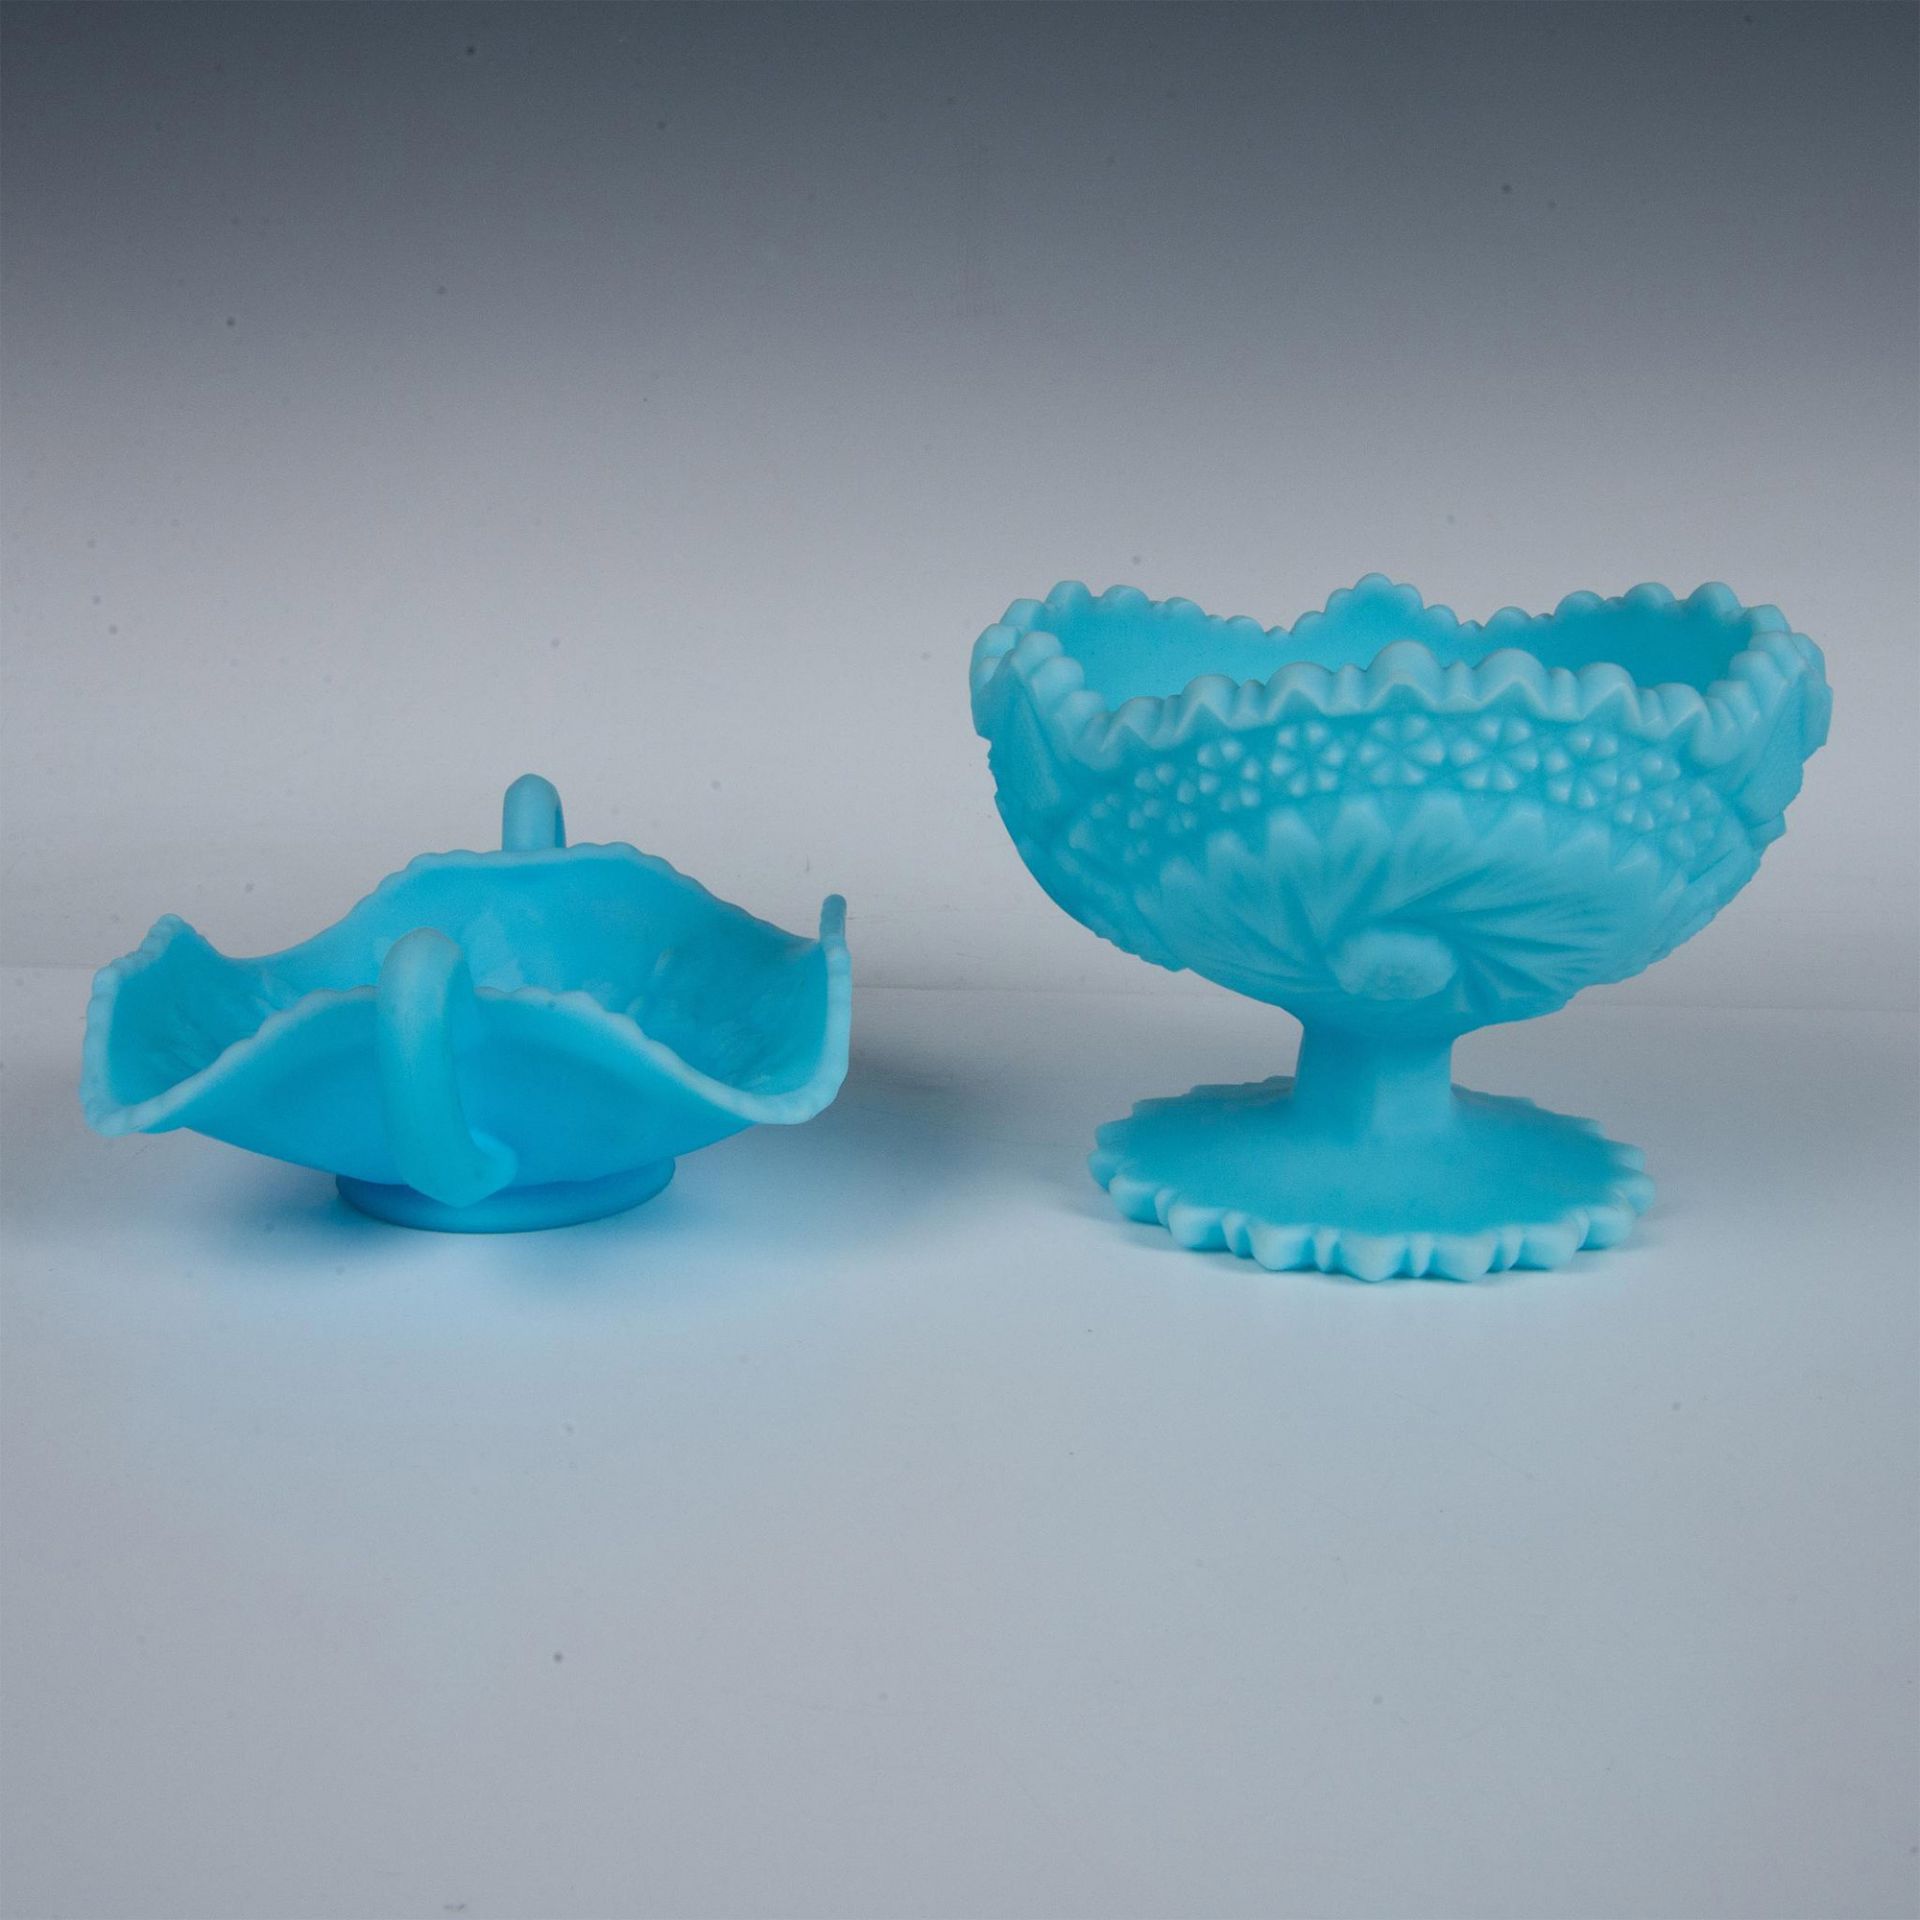 2pc Fenton Blue Satin Glass Serving Dishes - Image 2 of 4